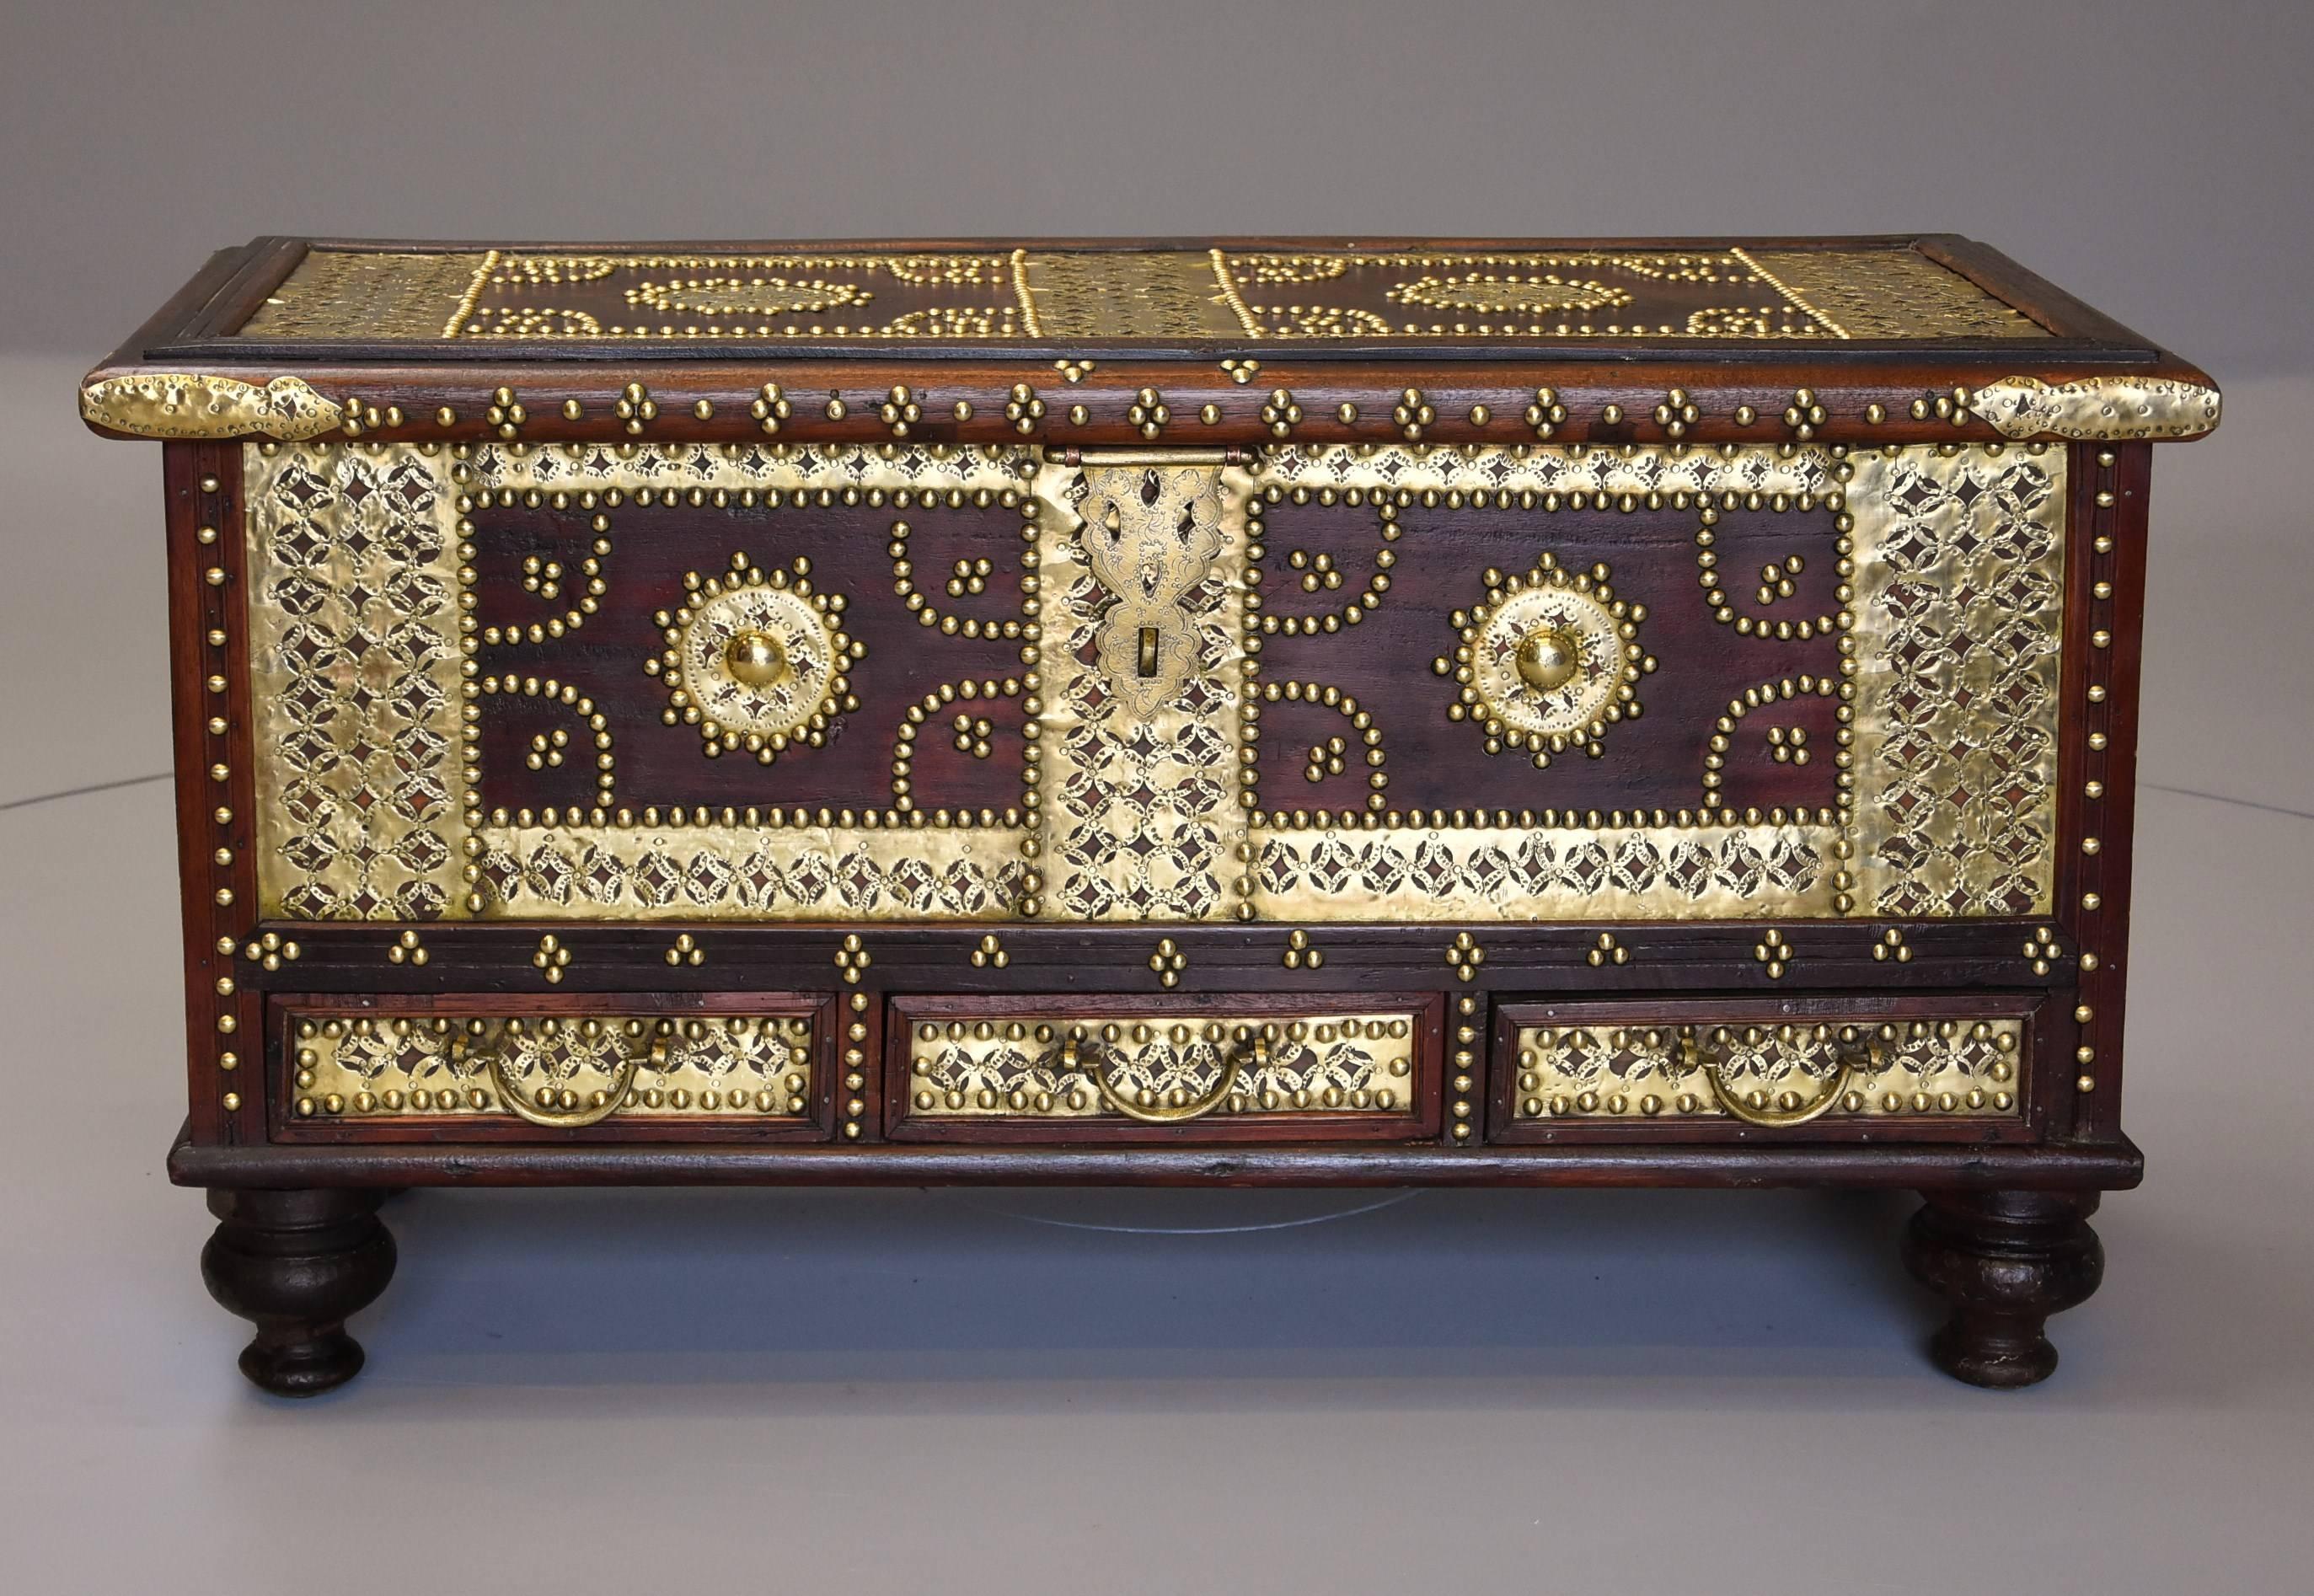 A mid-19th century hardwood highly decorative Zanzibar traders chest decorated with brass stud and metalwork. 

This type of chest would have been used by traders as they travelled to different areas selling spices and silks etc. 

The top is